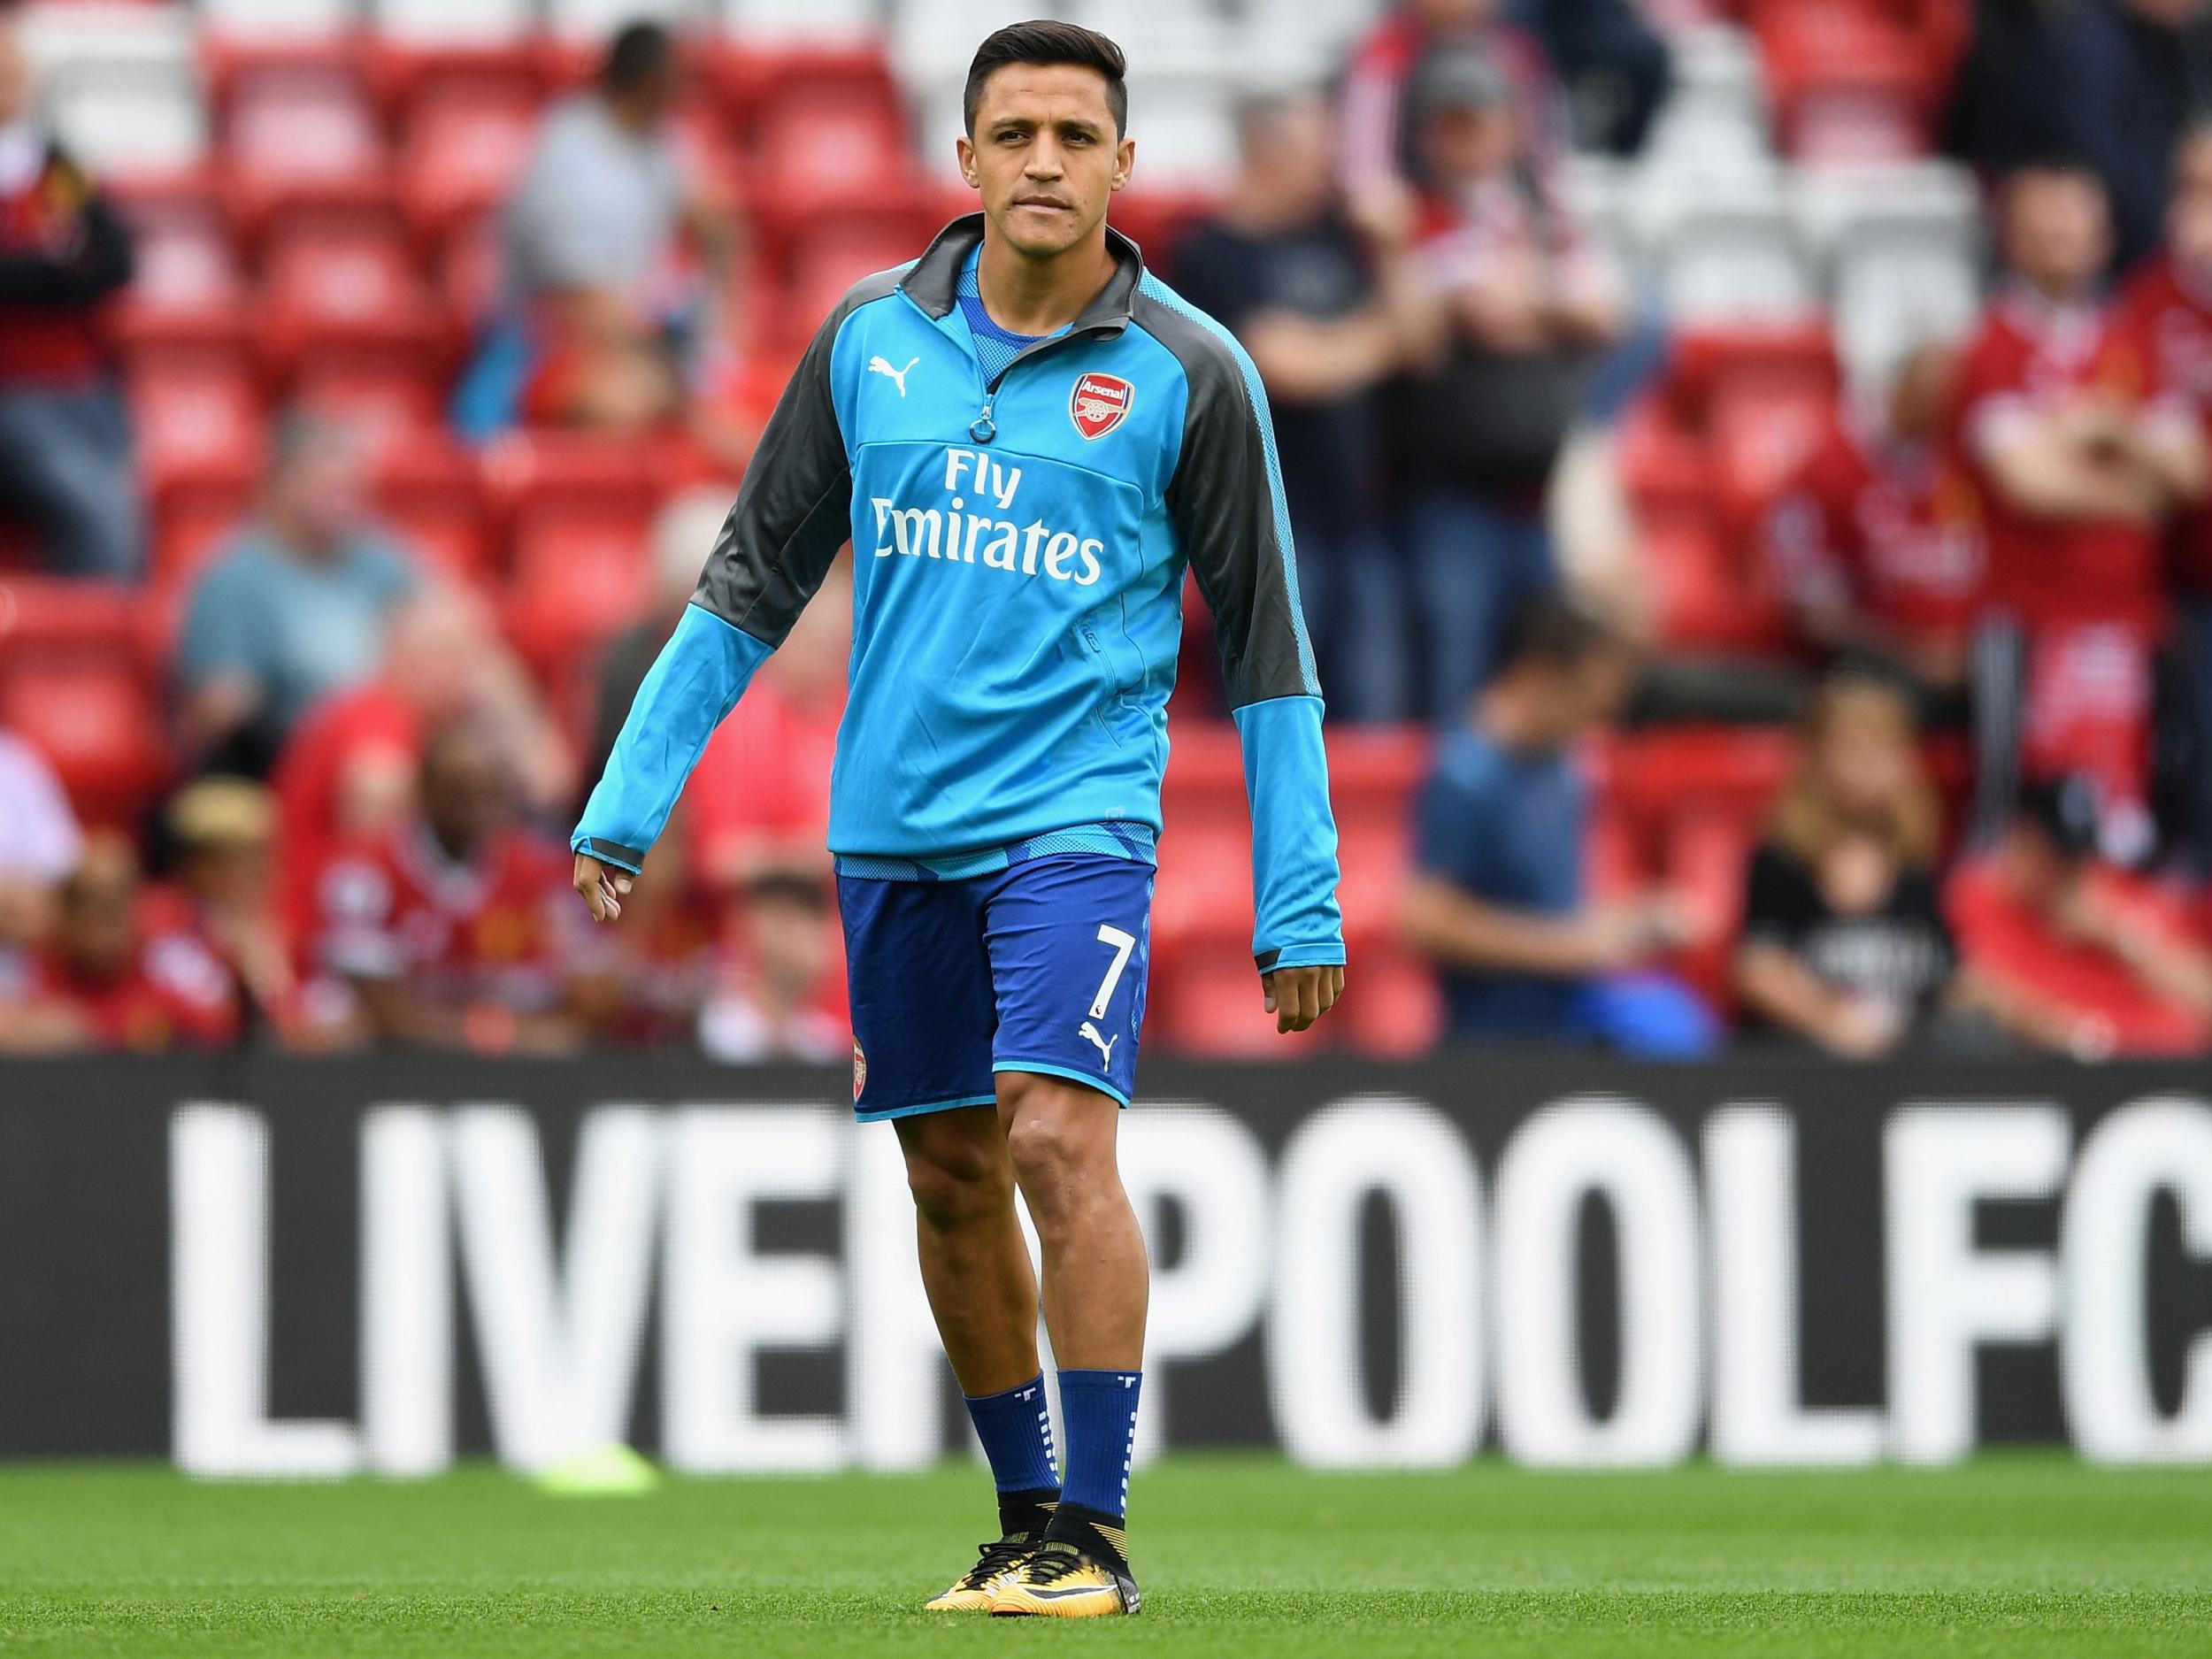 Asenal rejected a £50m bid for Alexis Sanchez from Manchester City on Wednesday